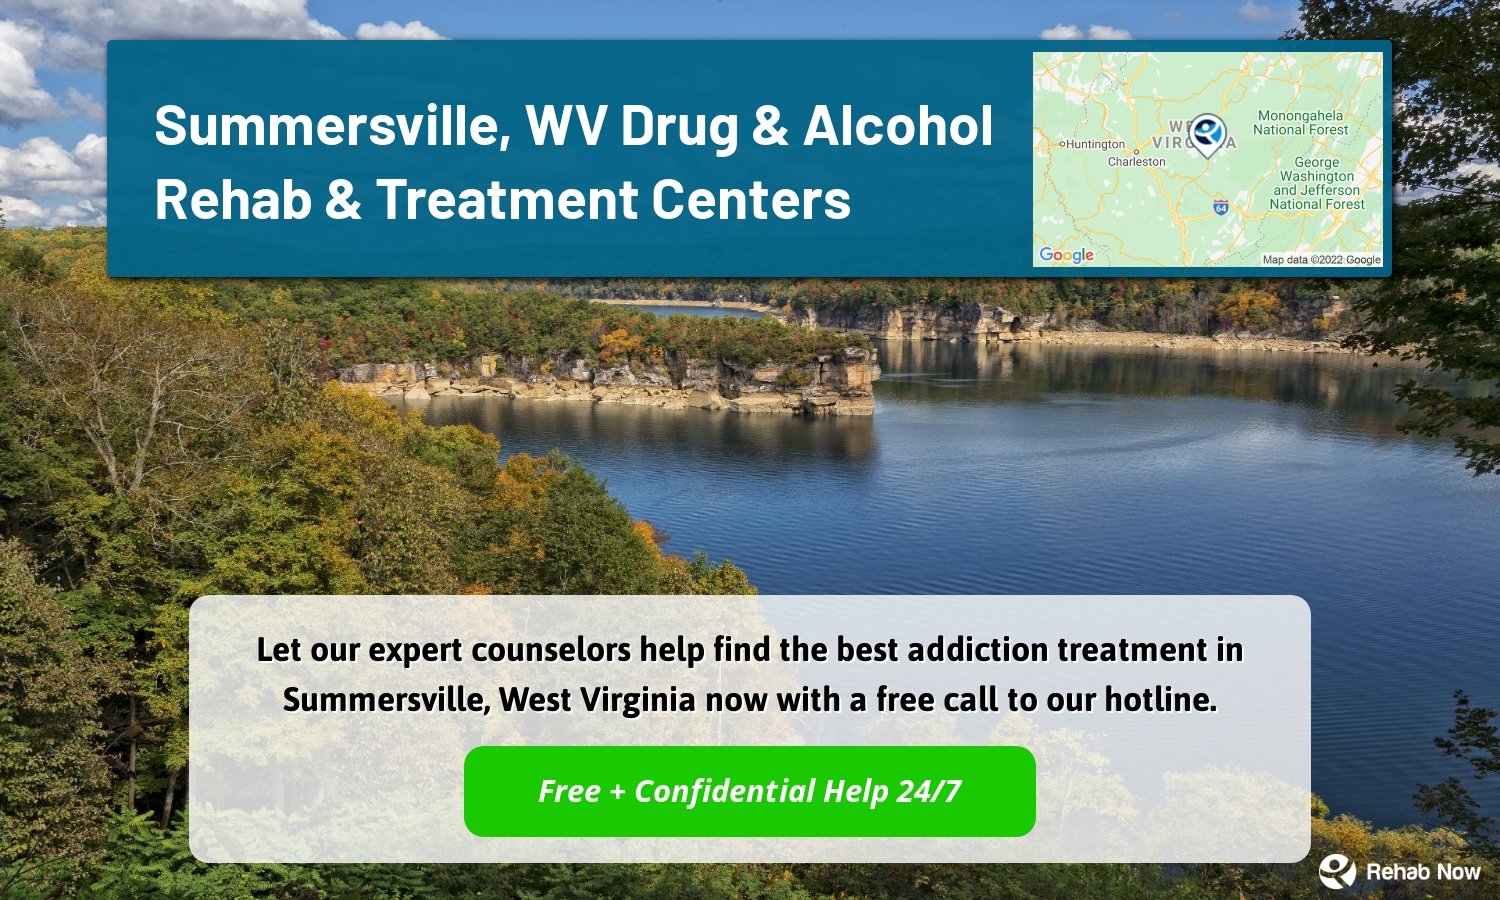 Let our expert counselors help find the best addiction treatment in Summersville, West Virginia now with a free call to our hotline.